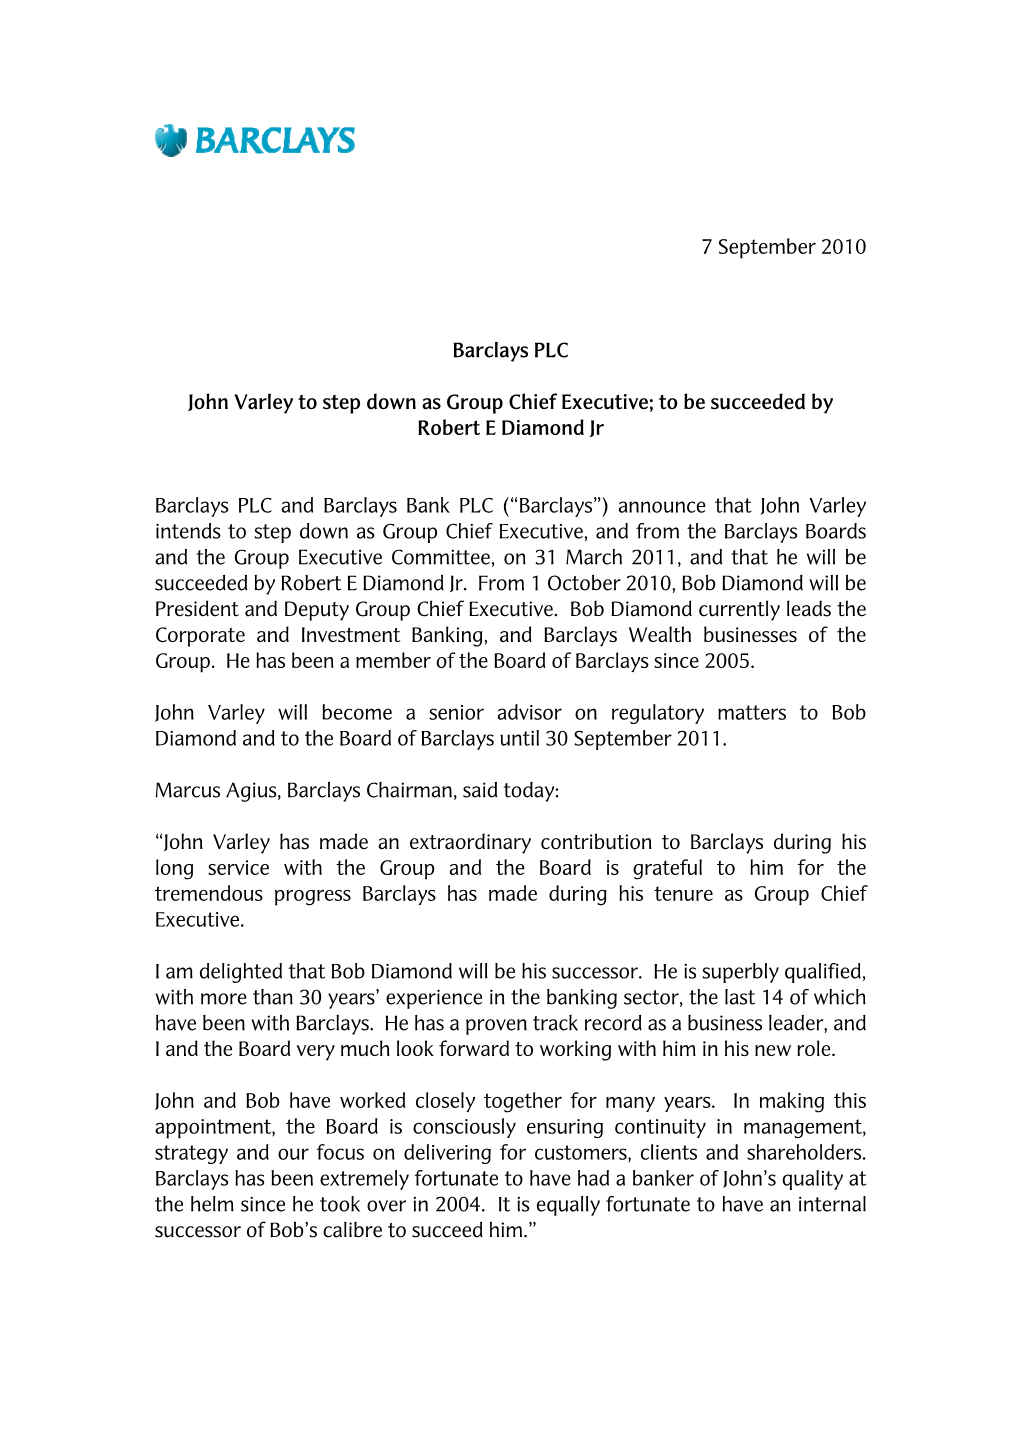 John Varley to Step Down As Group Chief Executive; to Be Succeeded by Robert E Diamond Jr